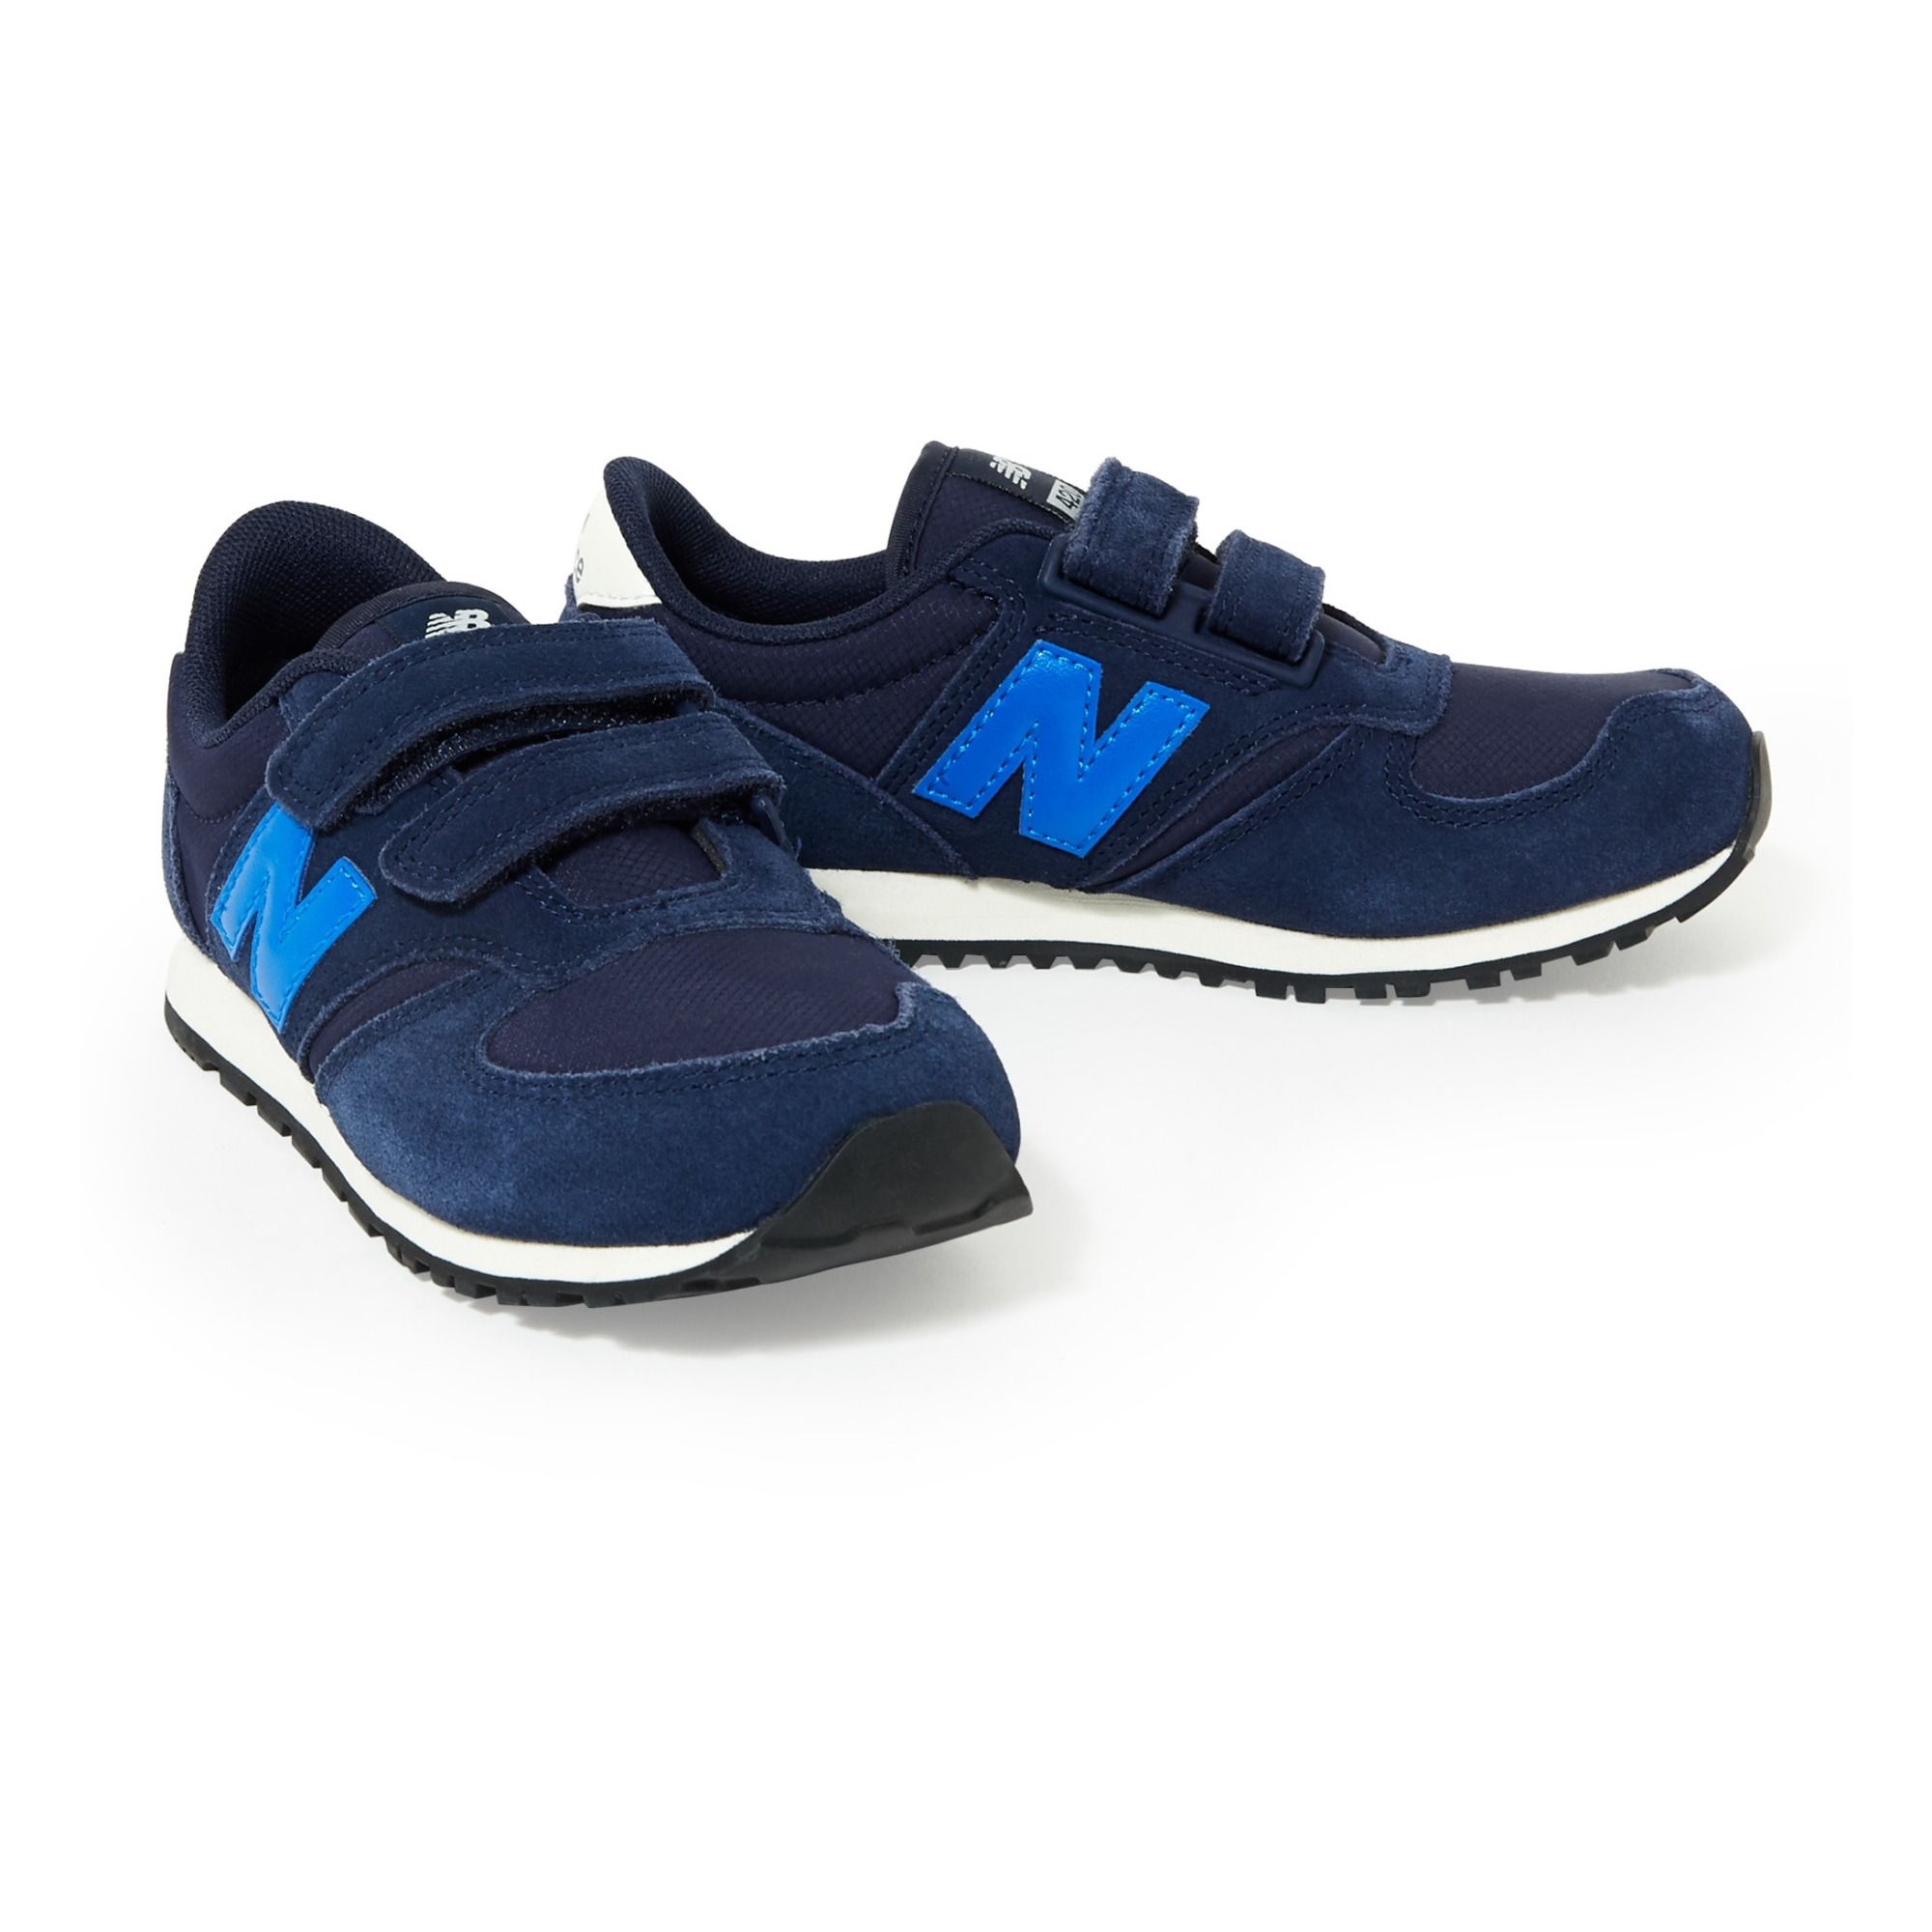 420 Bi-material Velcro Trainers Navy blue New Balance Shoes Baby